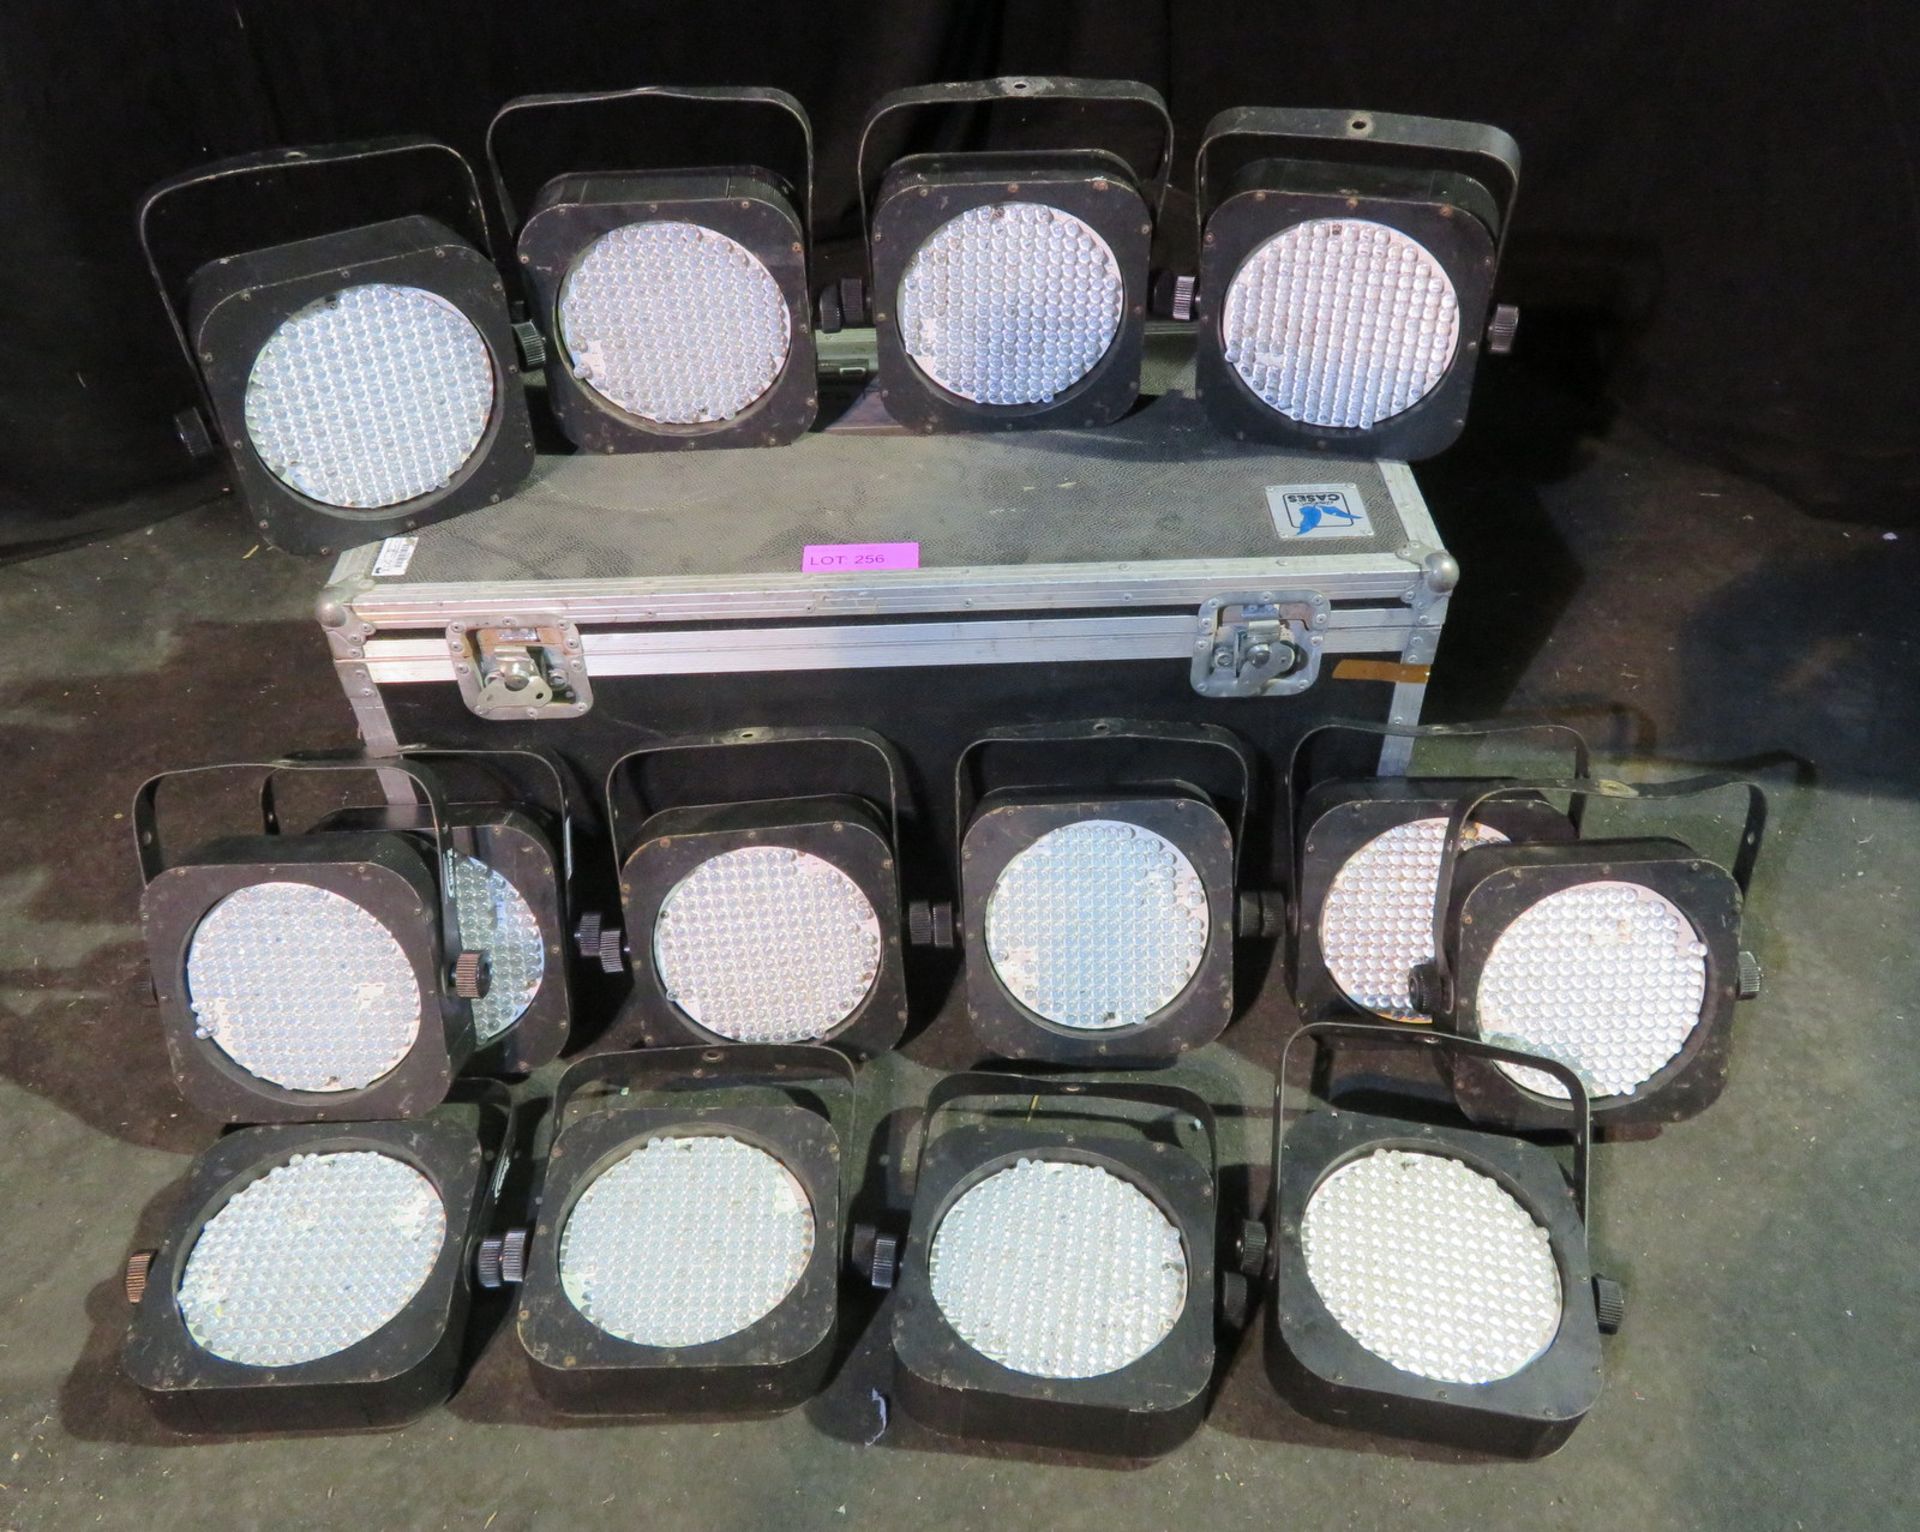 14x LED technologies Zoom flat LED par cans. Some with LEDs missing. Comes in flightcase